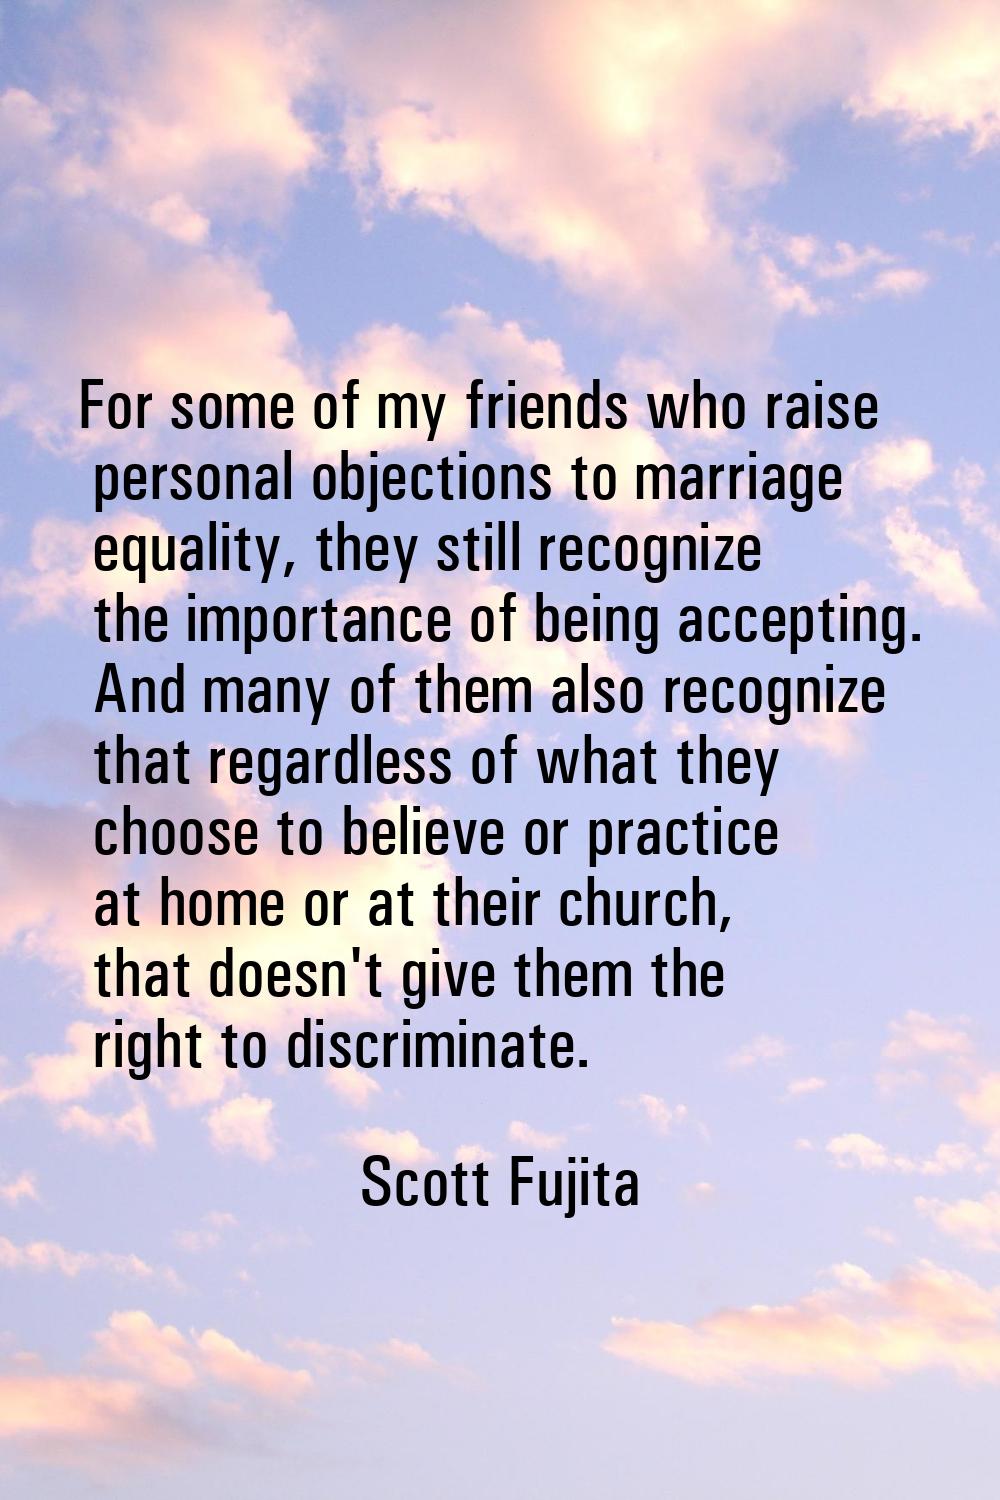 For some of my friends who raise personal objections to marriage equality, they still recognize the